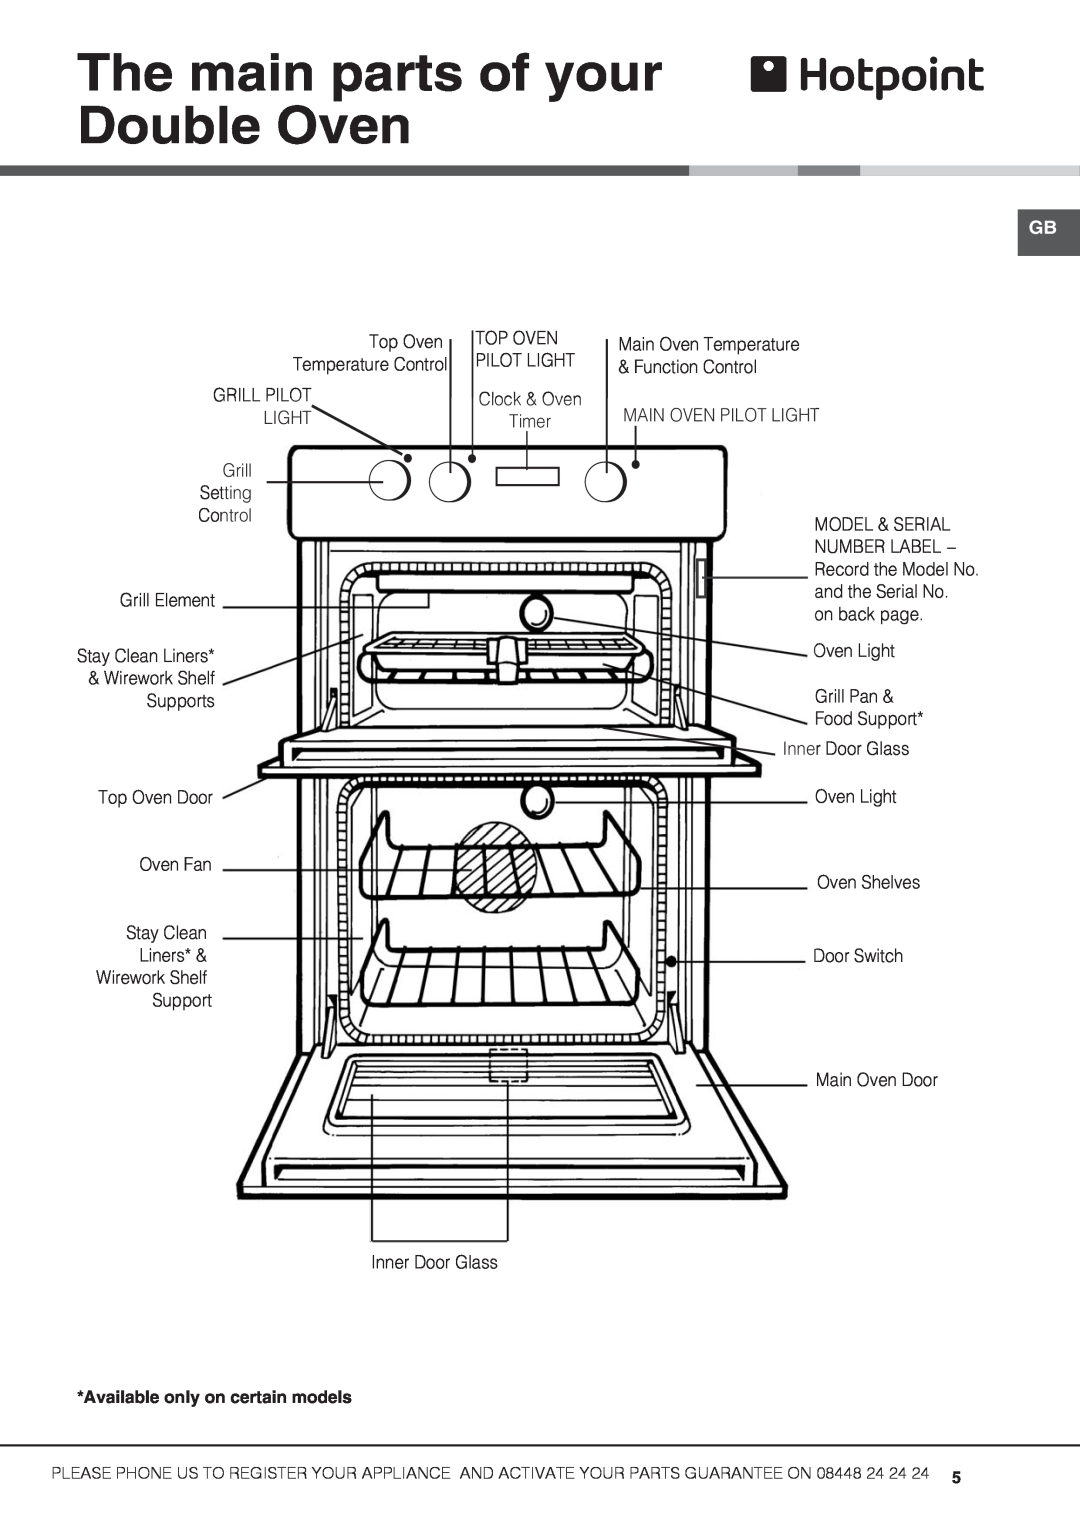 Hotpoint UHS53X S, UH53K S, UH53B S, Uh53W S, UD53X manual The main parts of your Double Oven, Available only on certain models 